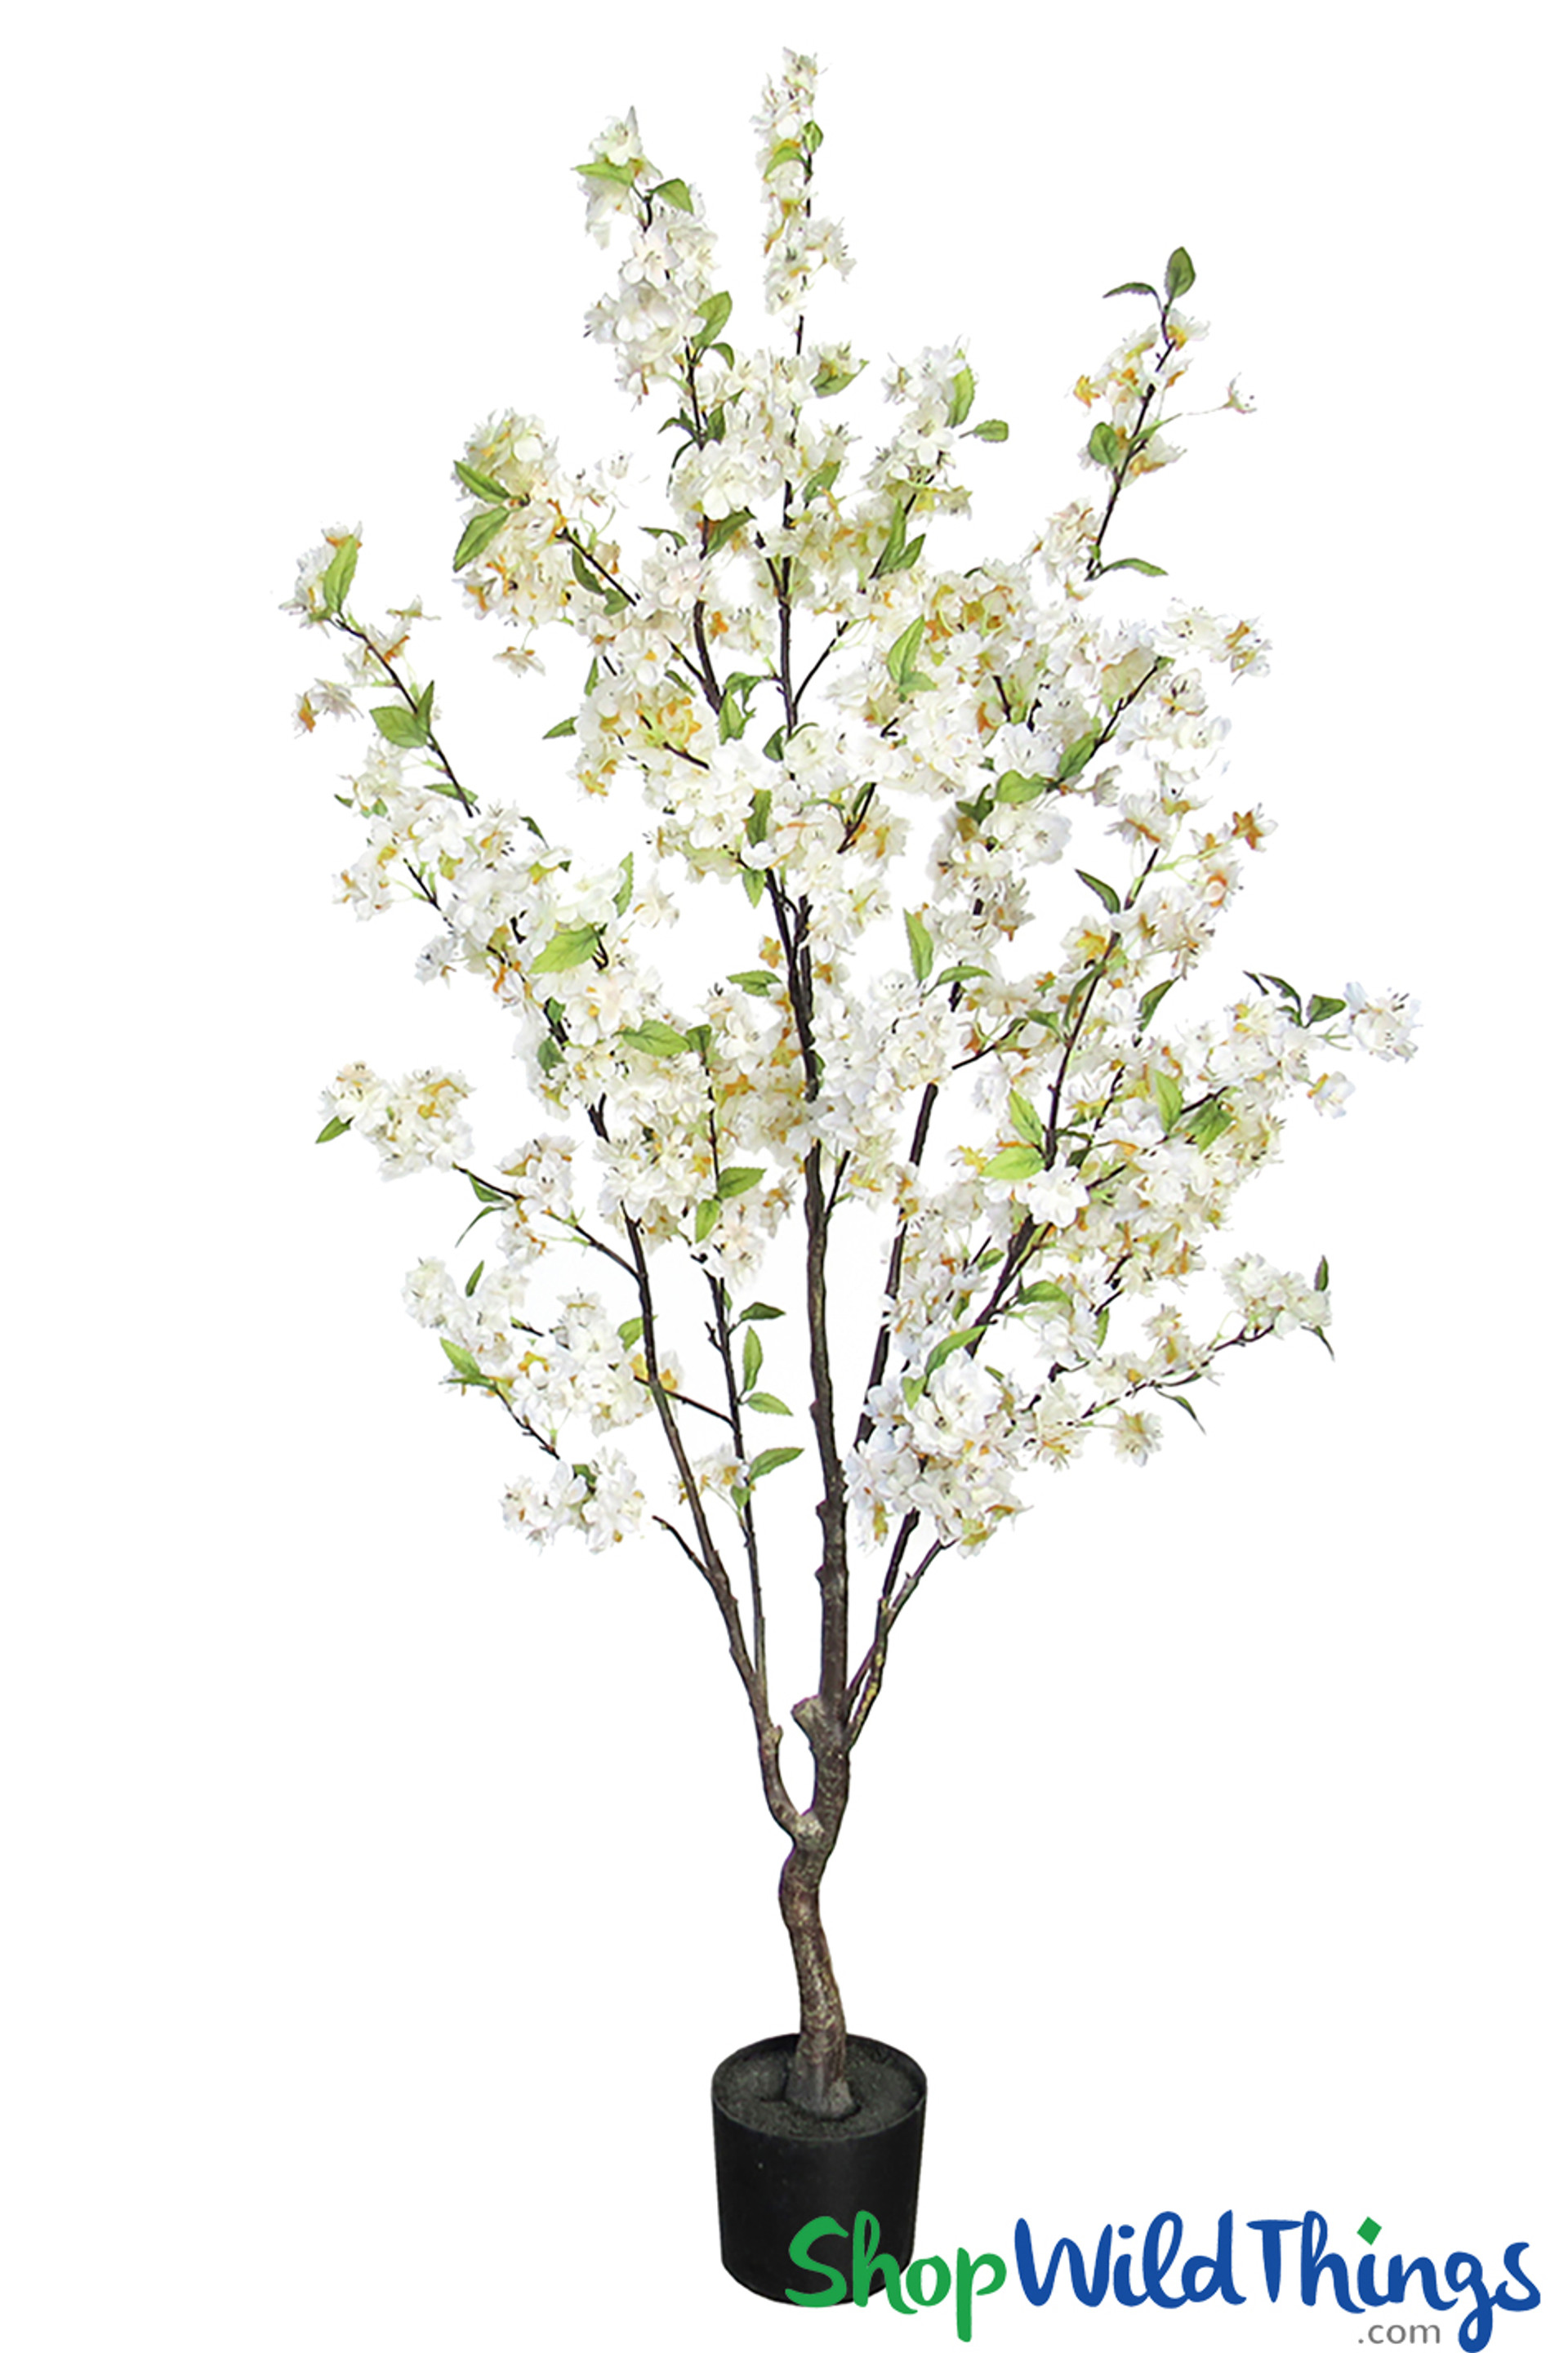 Faux Cherry Blossom Tree | 4.5' Tall Table Centerpiece | ShopWildThings.com